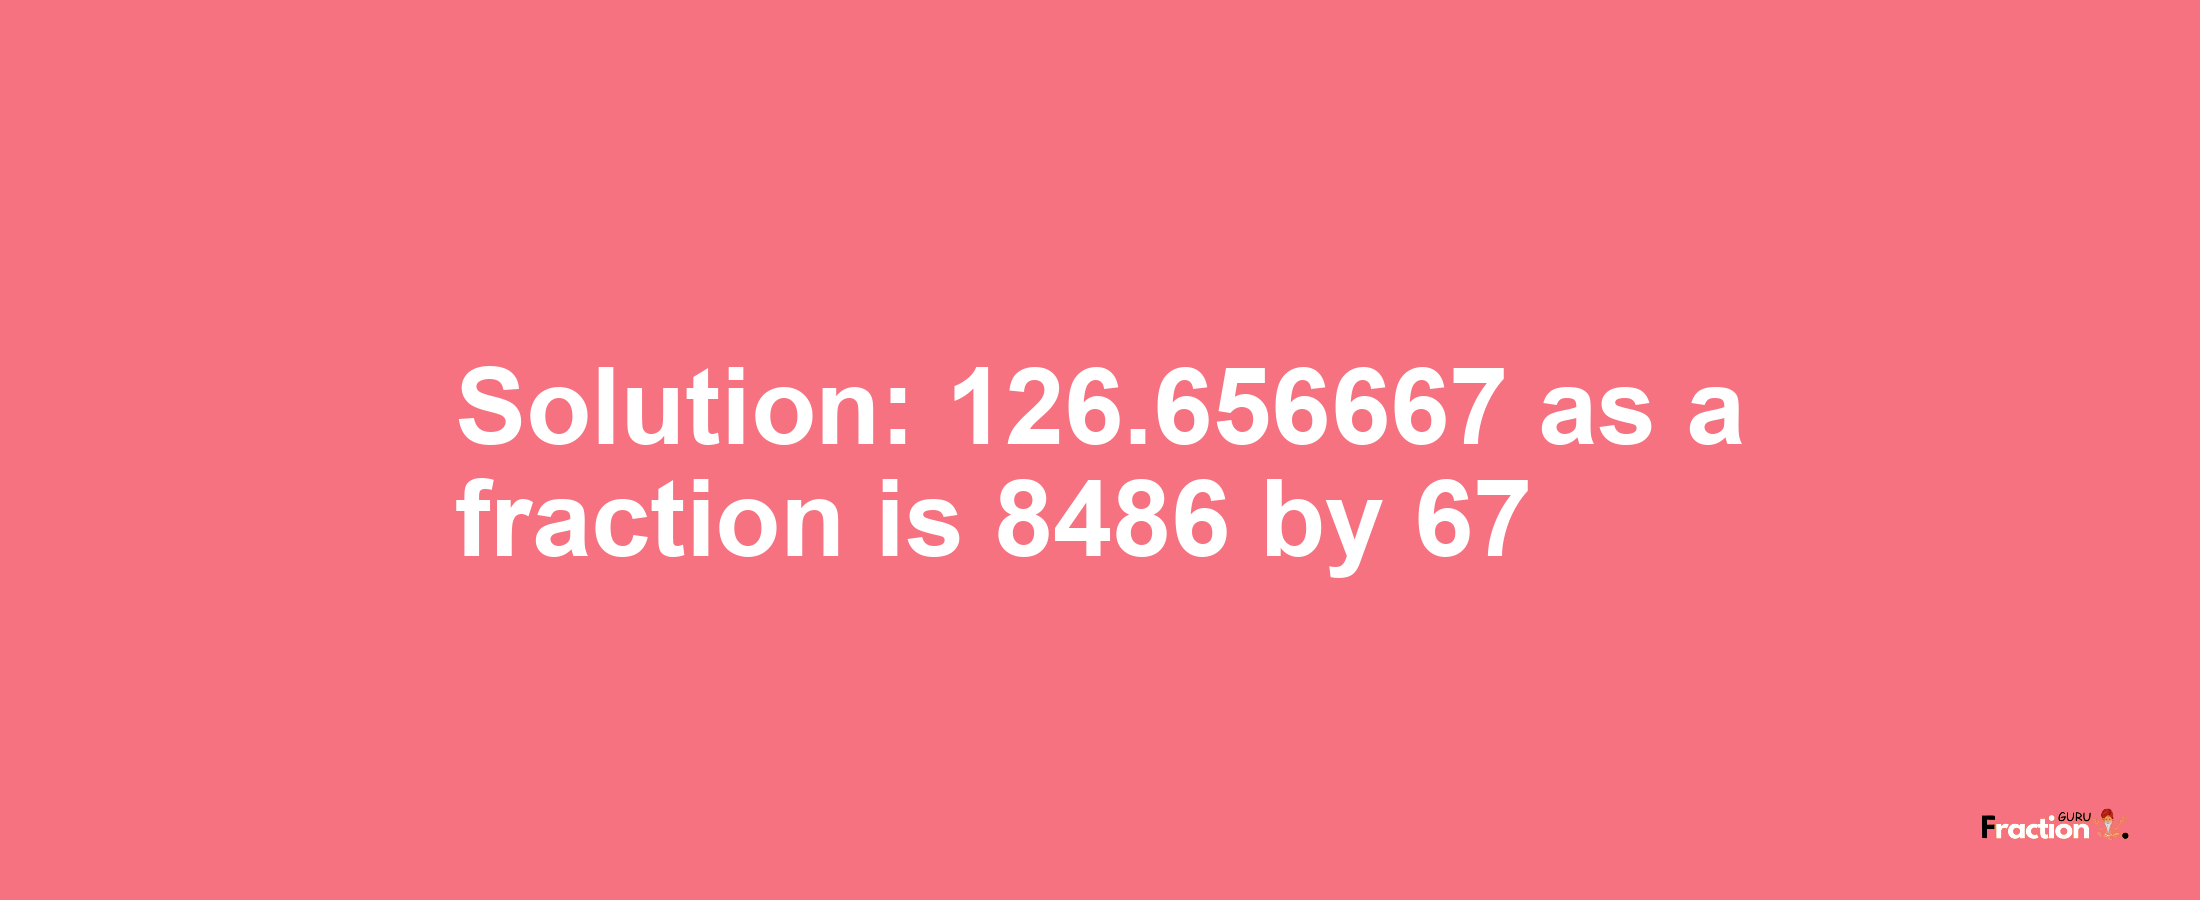 Solution:126.656667 as a fraction is 8486/67